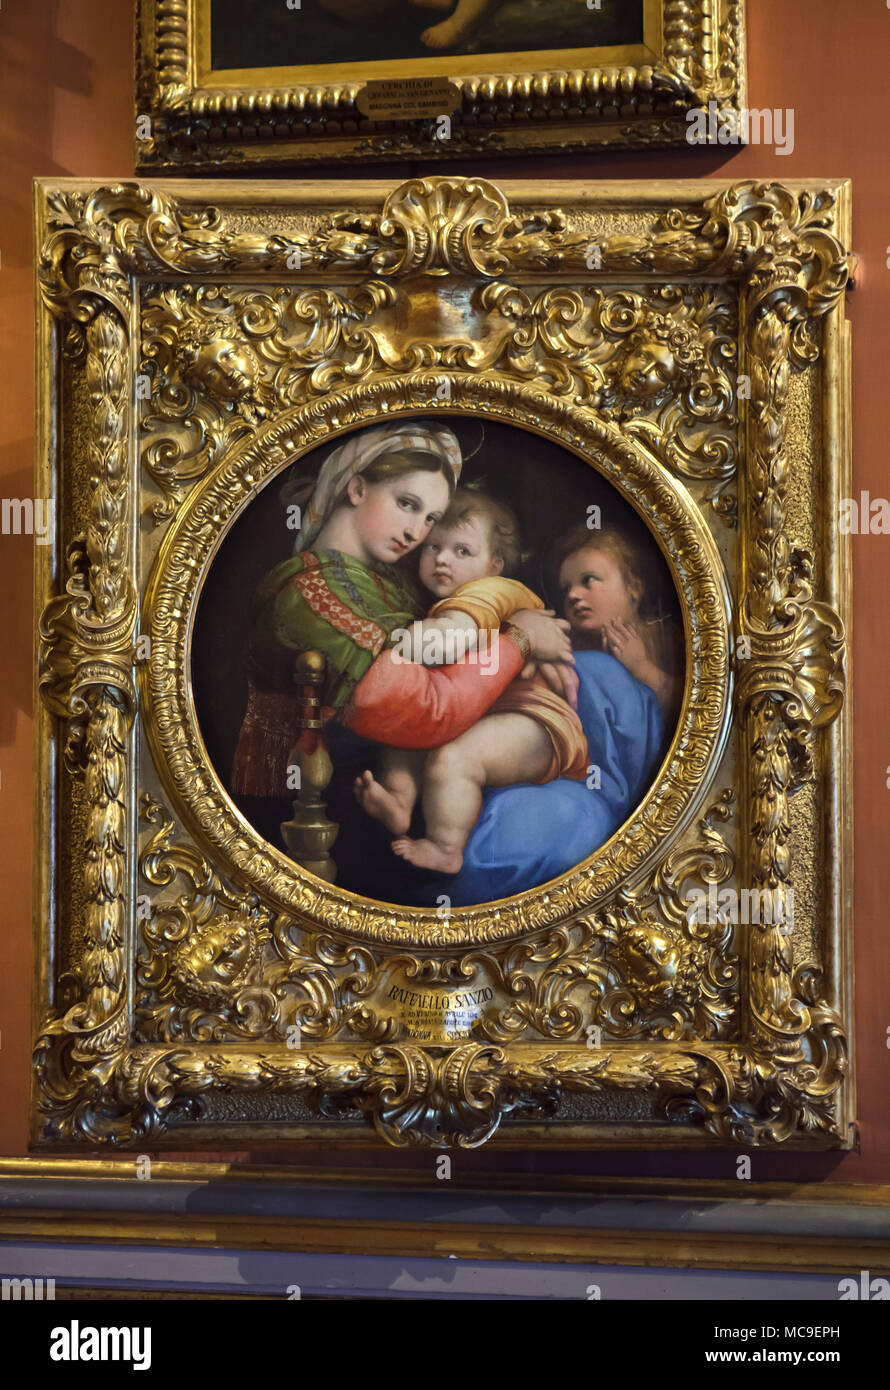 Painting 'Madonna della seggiola' (1513-1514) by Italian Renaissance painter Raphael on display in the Palatine Gallery (Galleria Palatina) in the Palazzo Pitti in Florence, Tuscany, Italy. Stock Photo